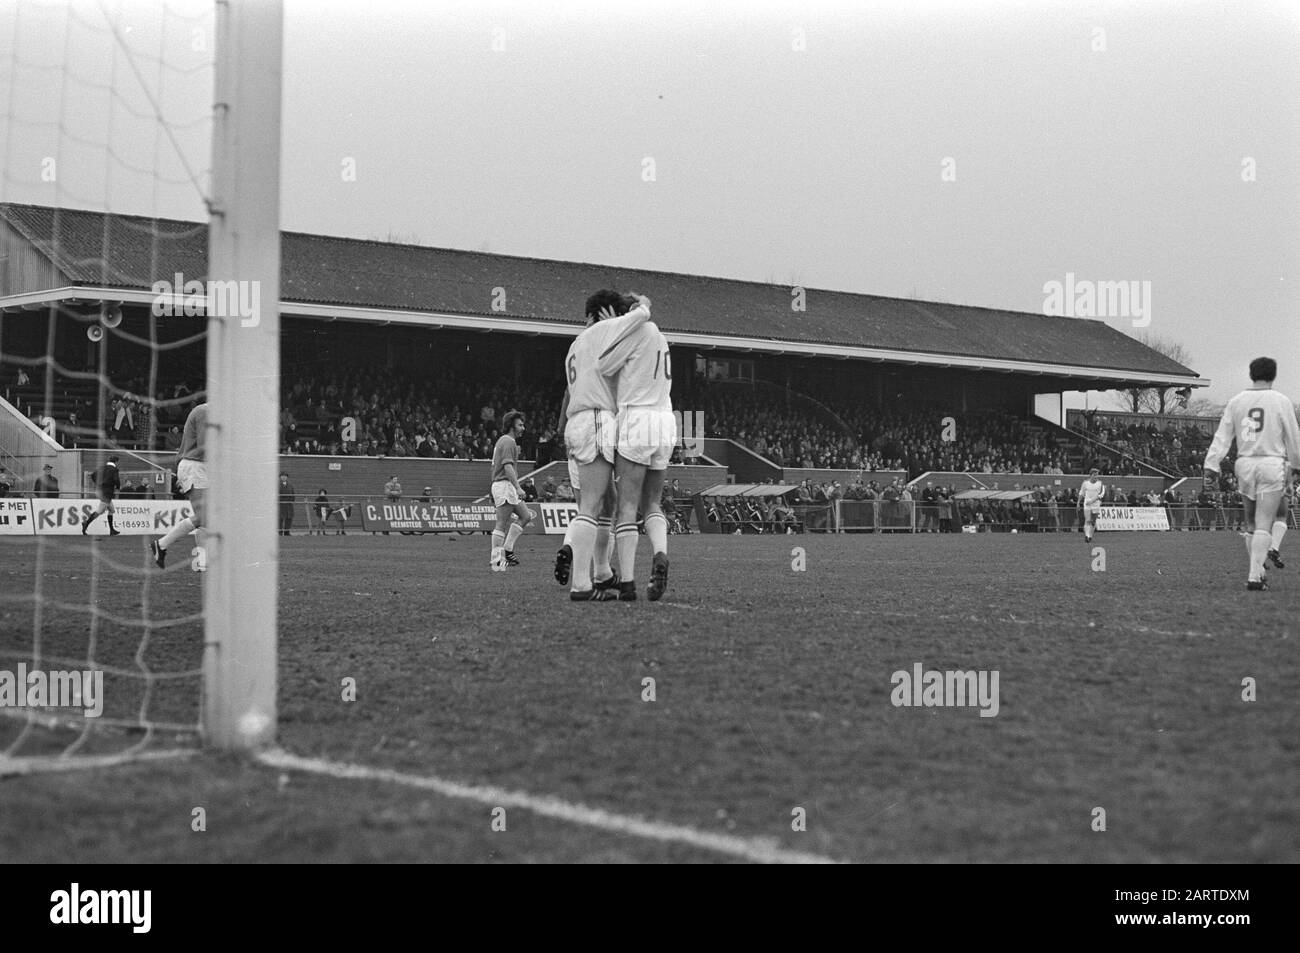 Football match for the quarterfinals of the KNVB cup RCH - Sparta: 1-4  Game Moment Date: 7 April 1971 Location: Heemstede, Noord-Holland Keywords: players, sport, football Institution name: Sparta Stock Photo